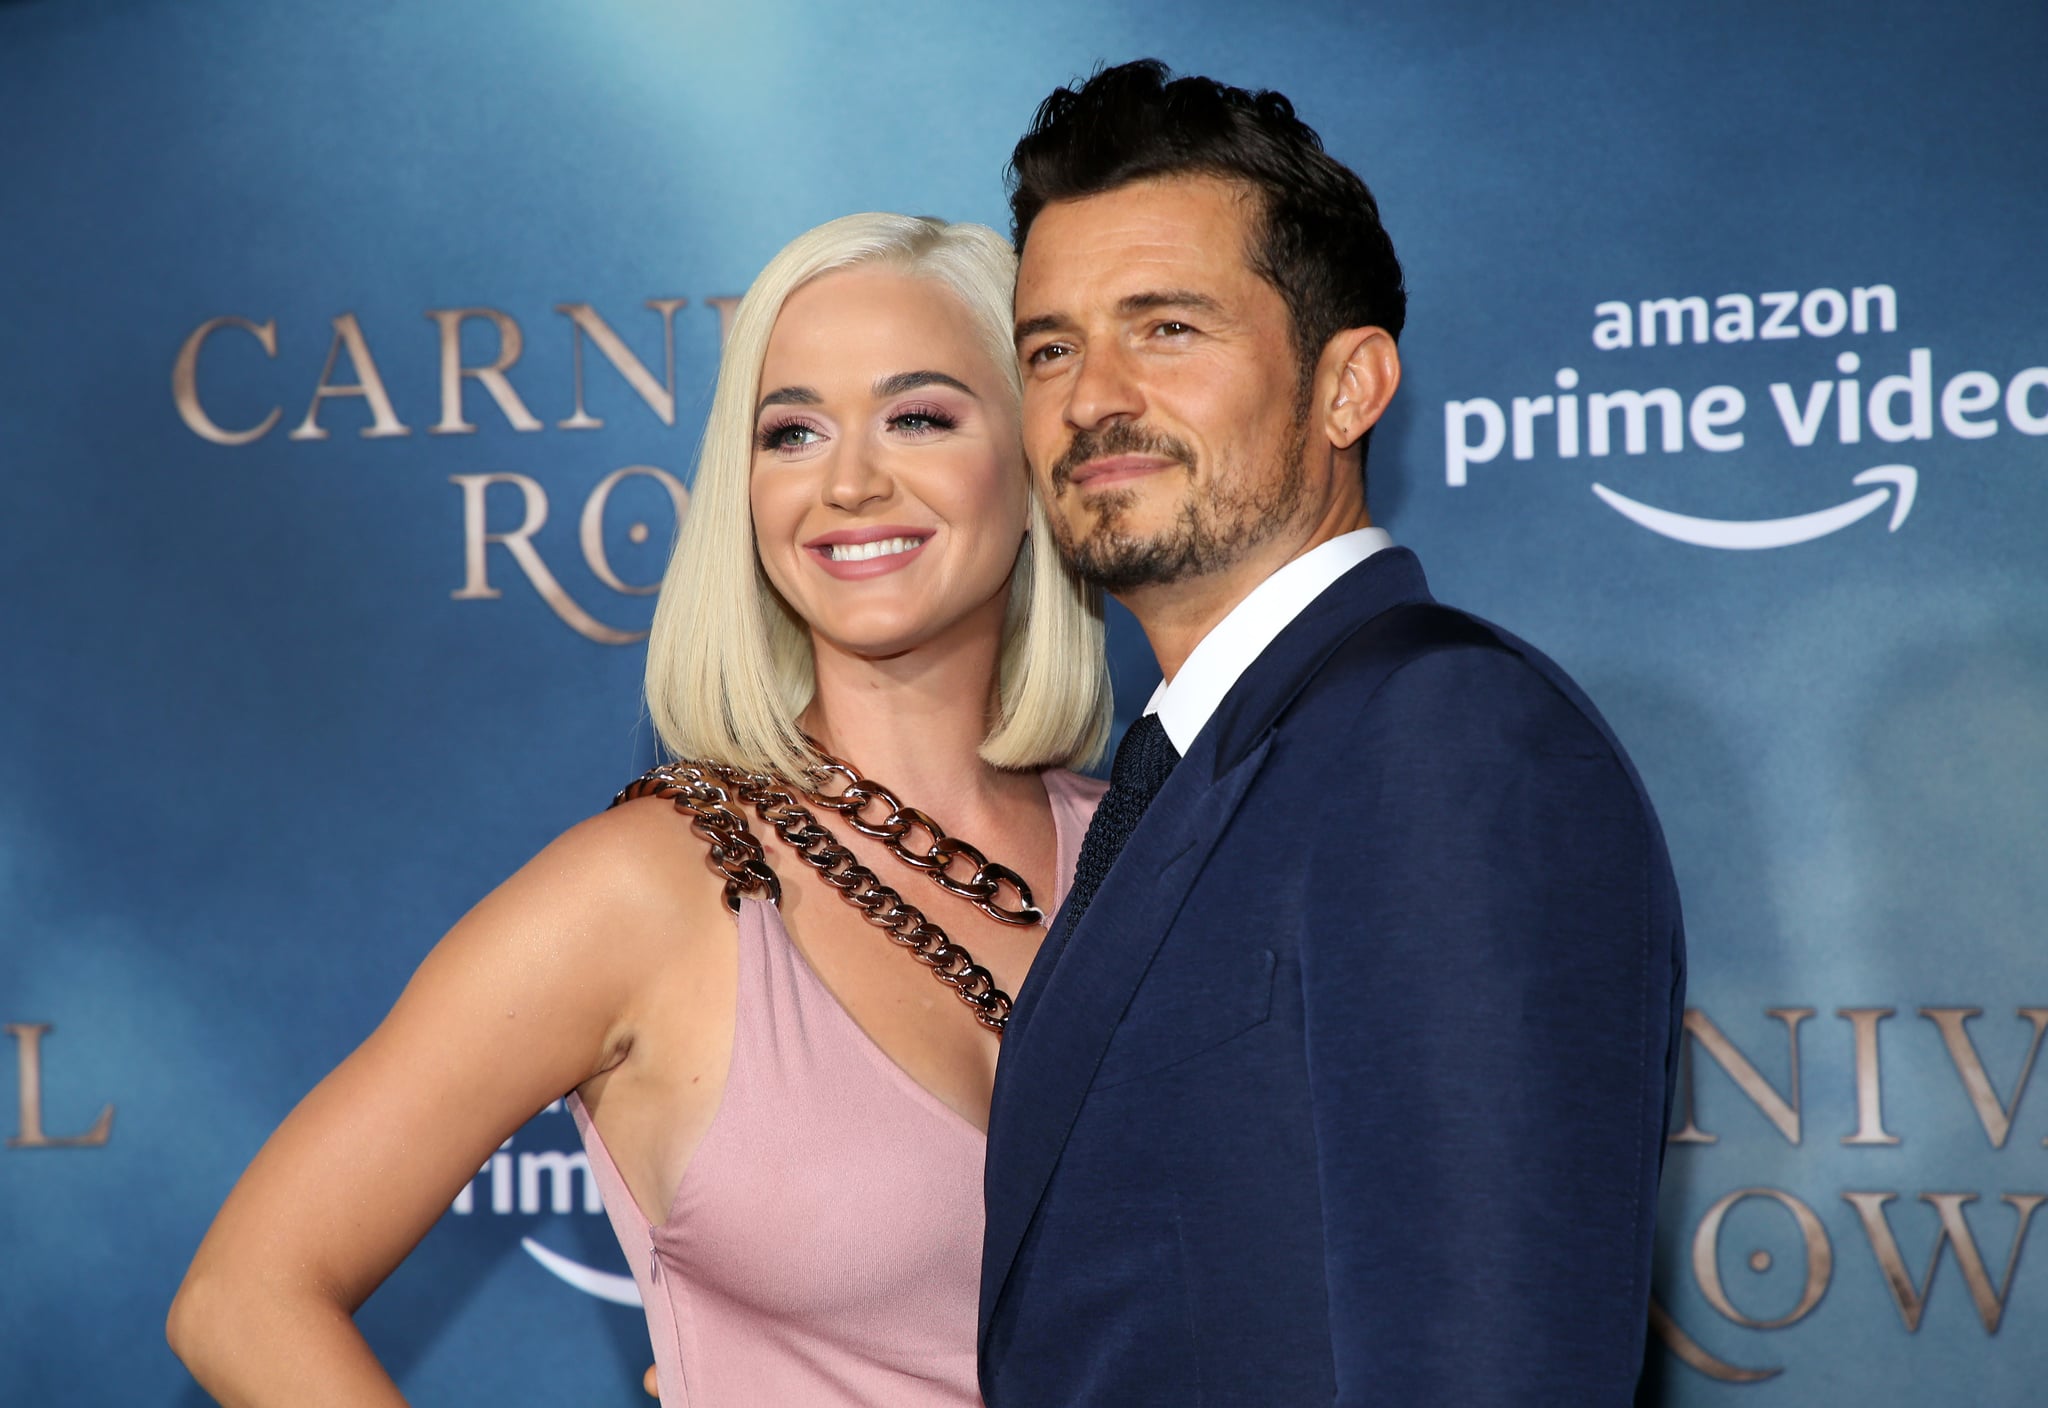 HOLLYWOOD, CALIFORNIA - AUGUST 21: Katy Perry and Orlando Bloom attend the LA premiere of Amazon's